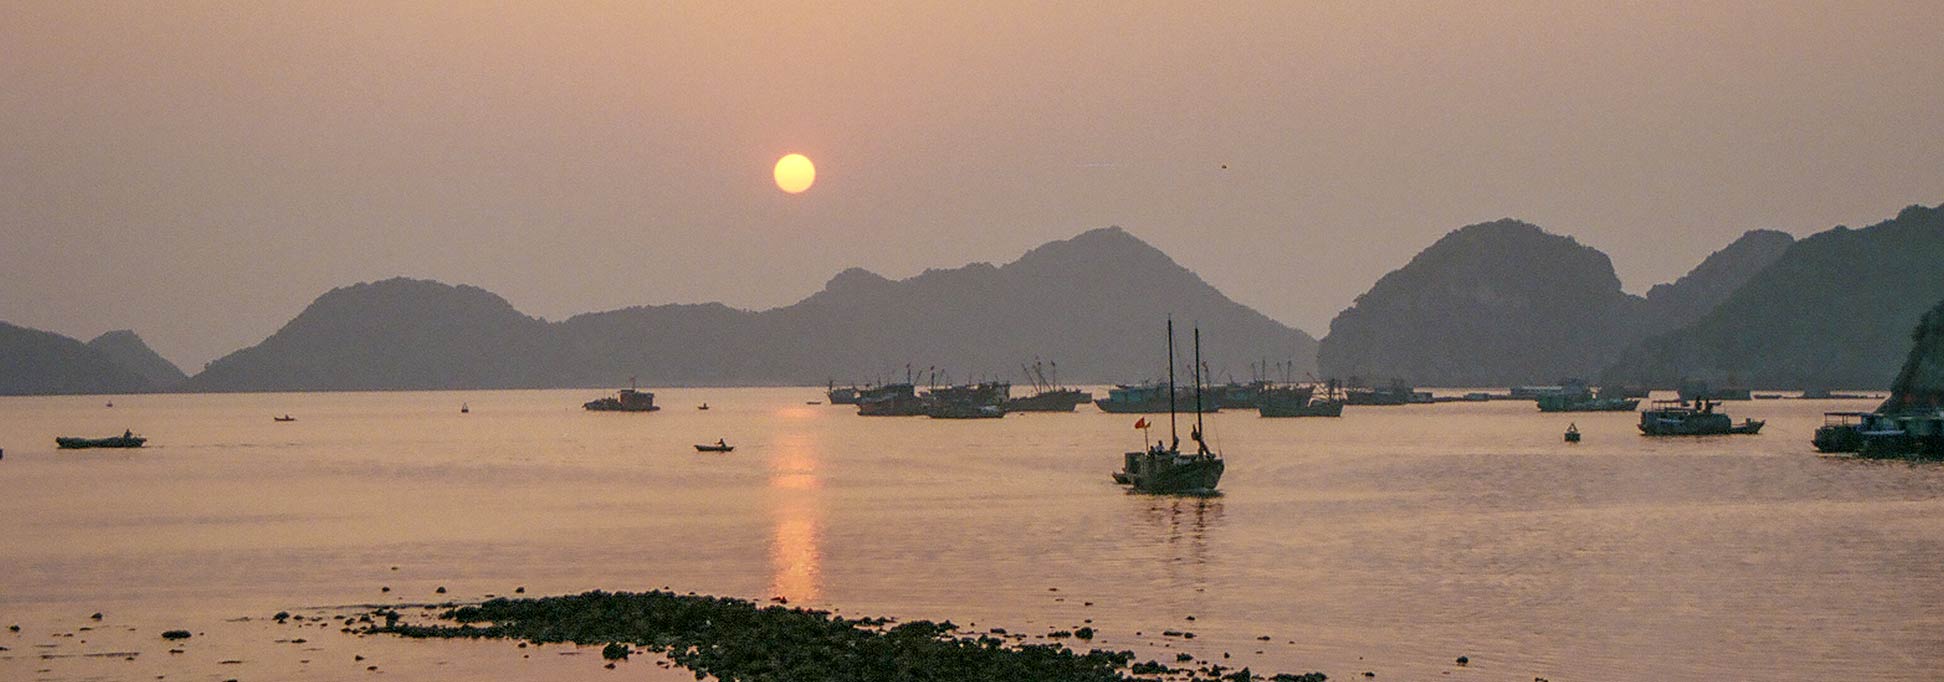 Sunset at Halong Bay from Cat Ba Island in Vietnam